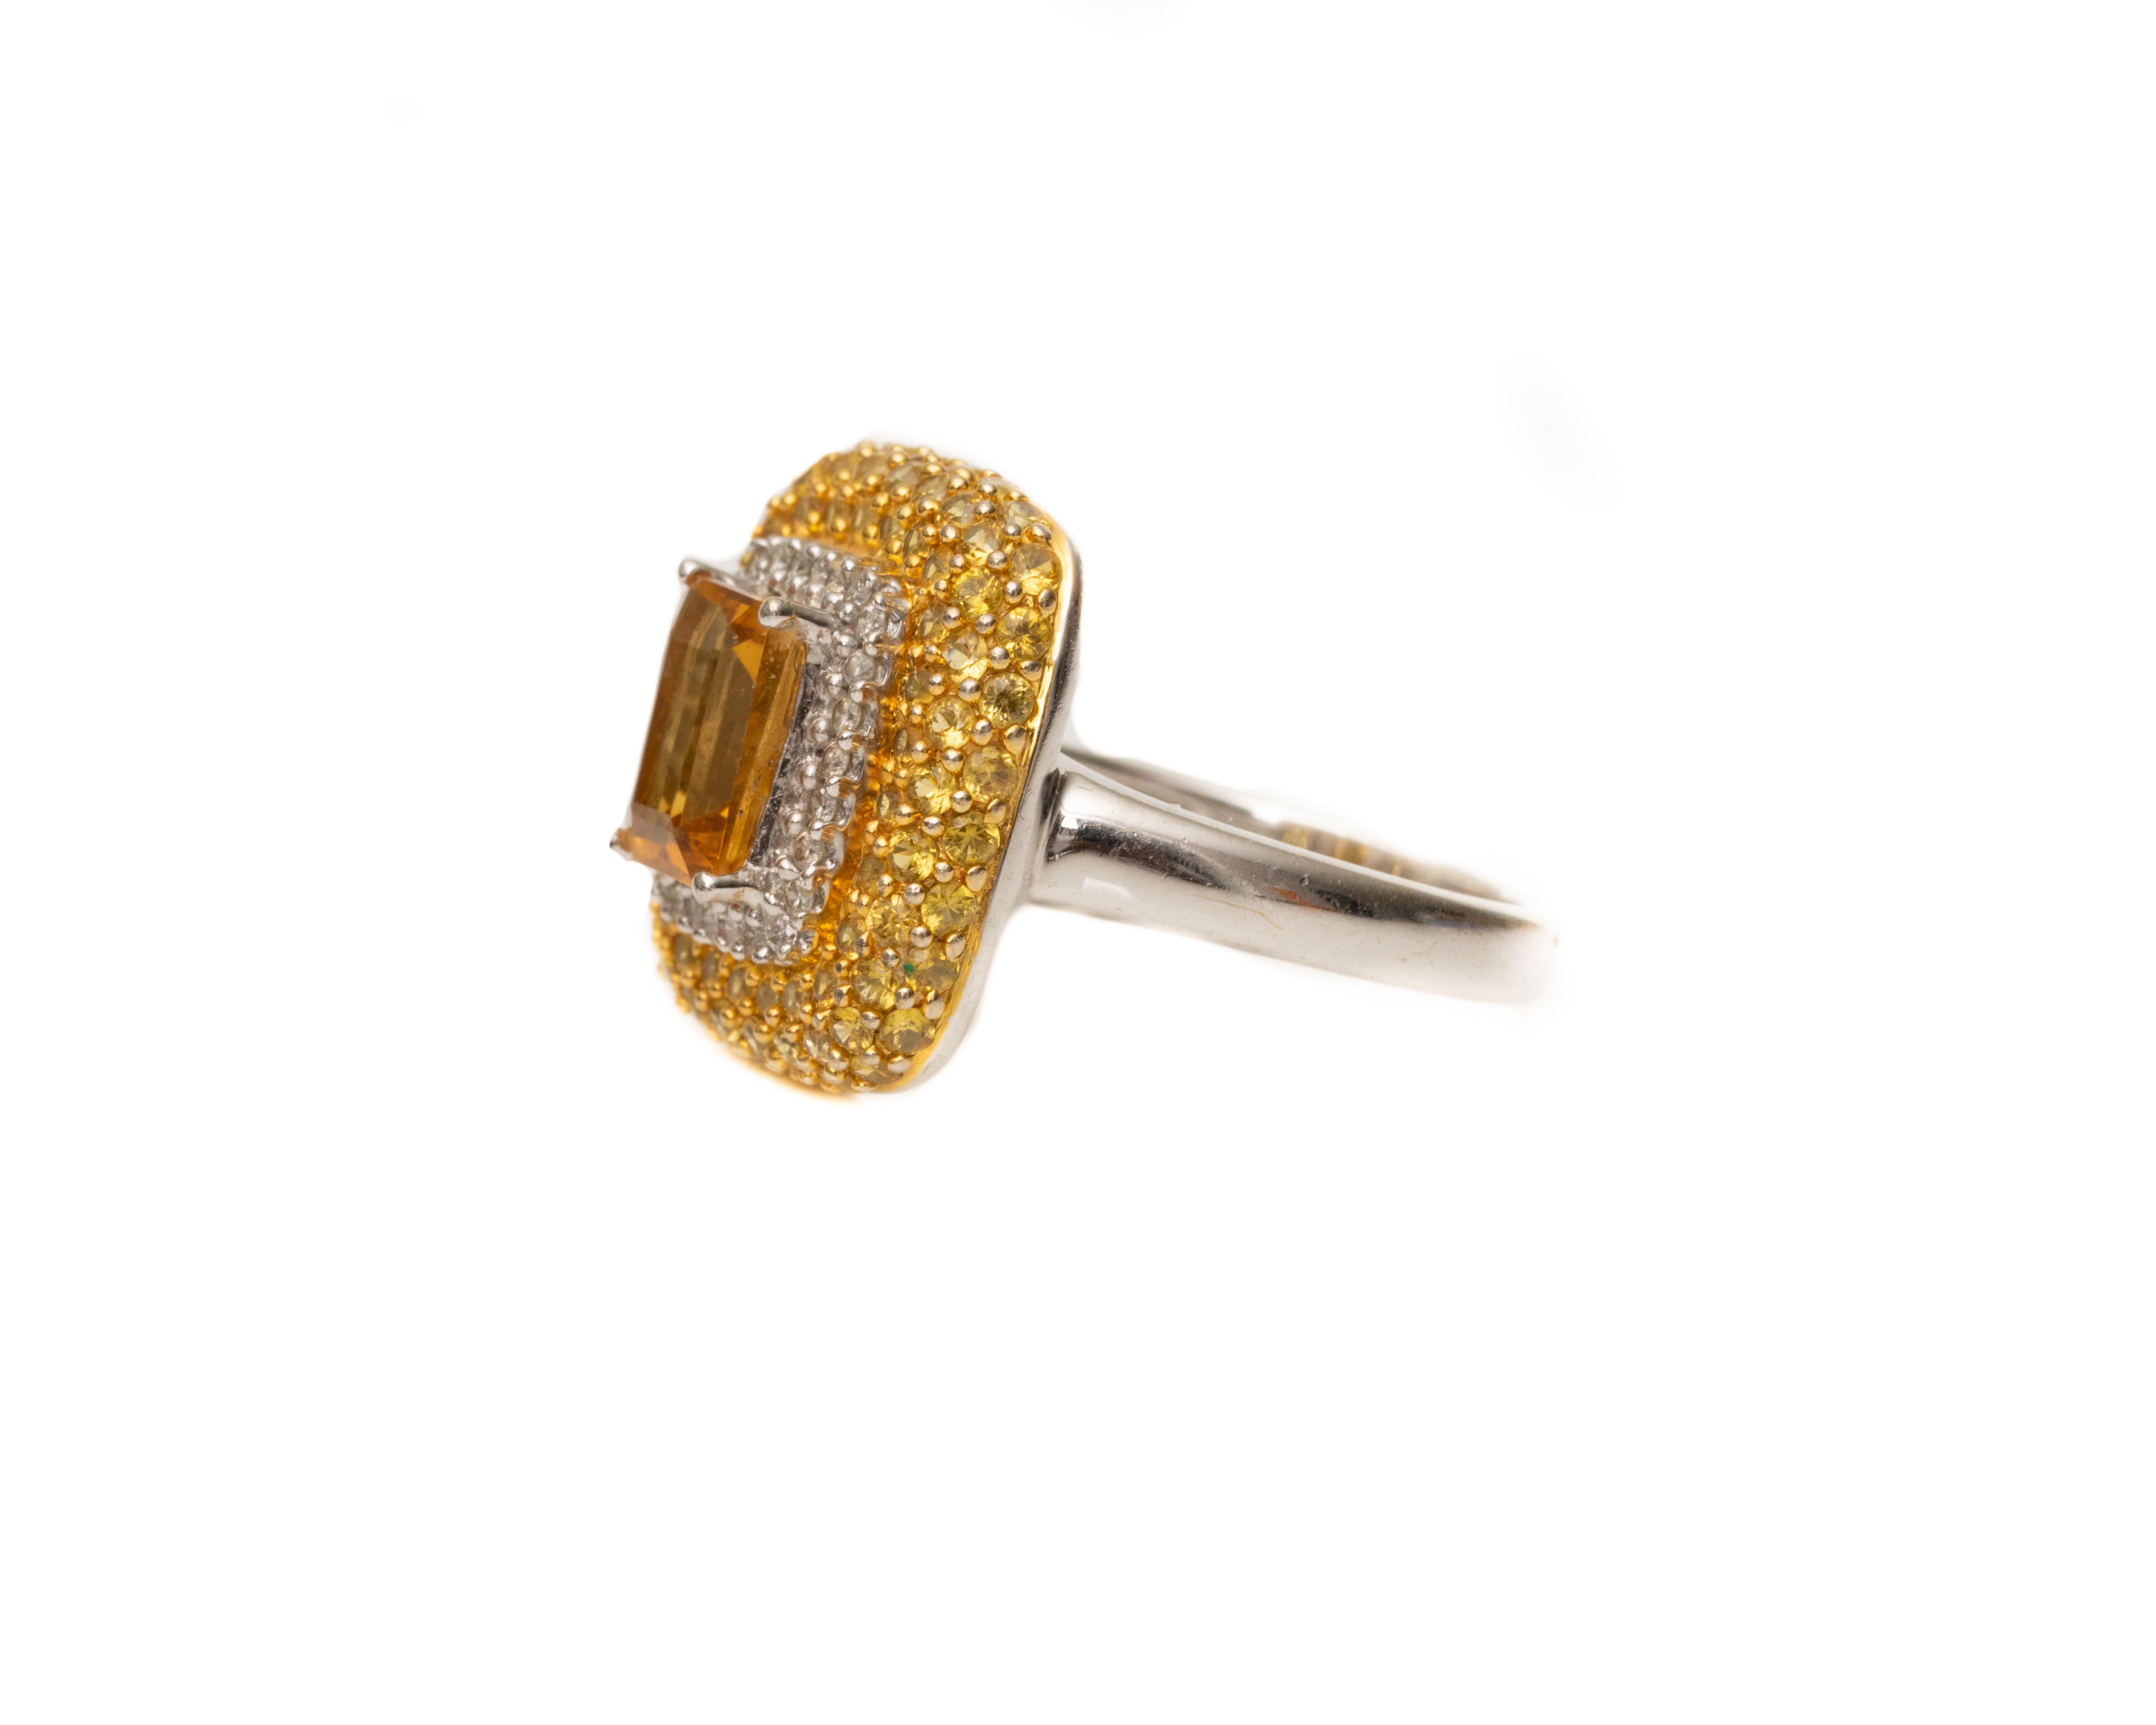 Ring Details:
Metal type: 18 Karat White Gold
Ring Size: 6.5 (resizable)
Weight: 7.78 grams

Features:
1 Carat Citrine int he center, prong set and emerald cut
1 Carat Total of Yellow Sapphires, all round cut and prong set. These make up the outer 3